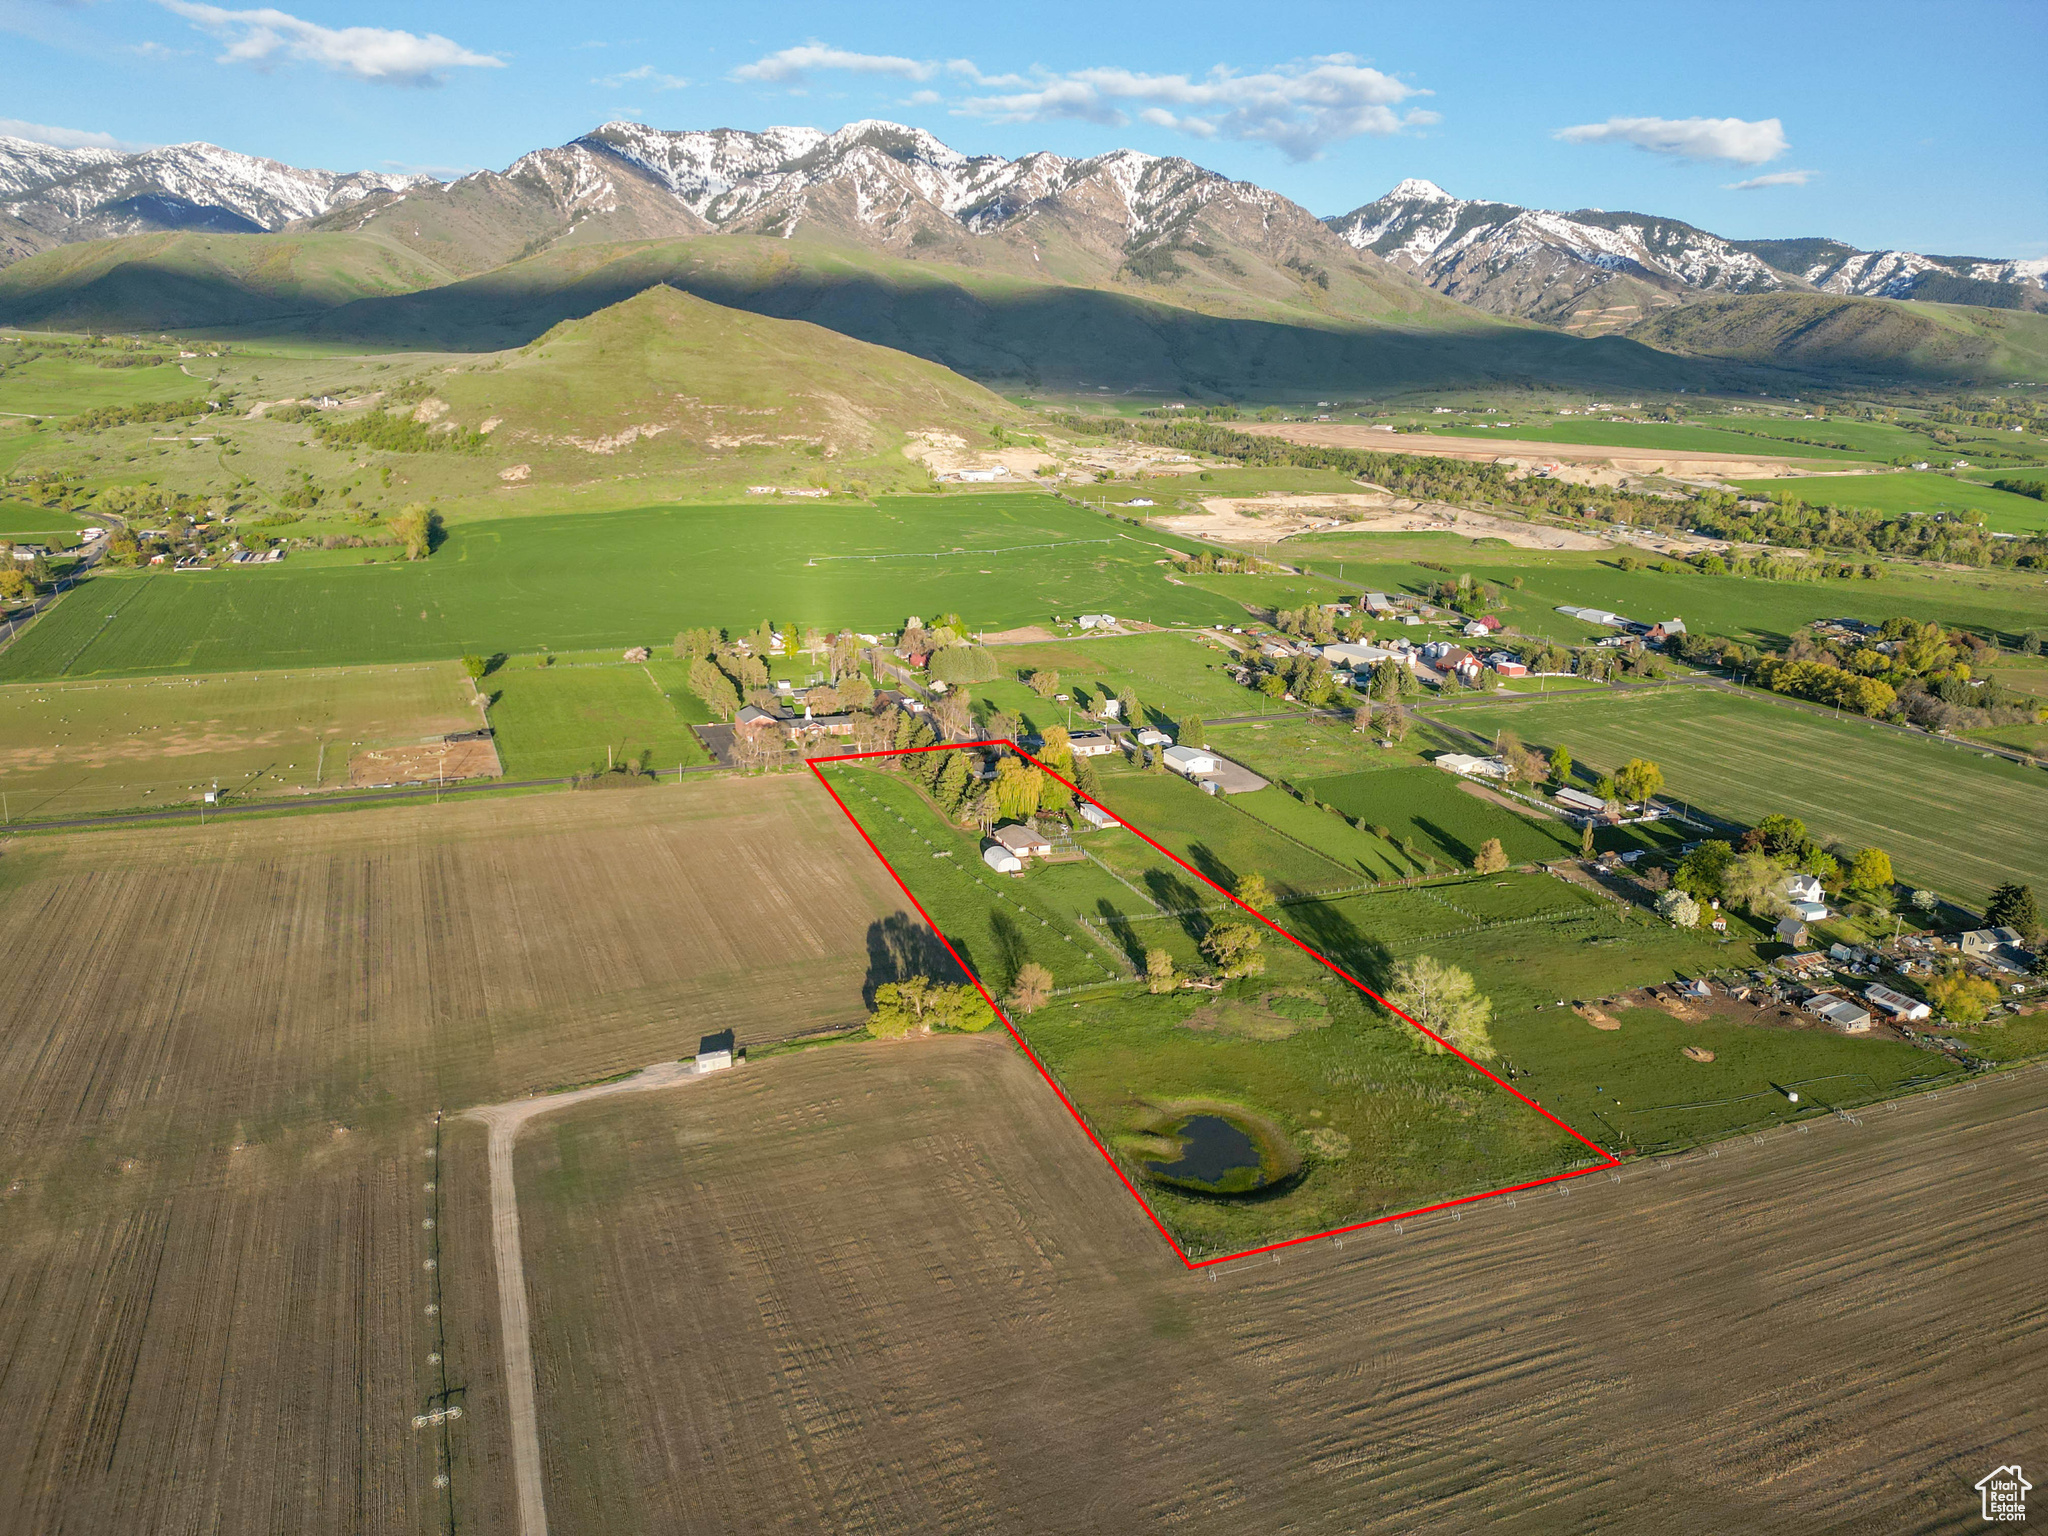 Bird's eye view featuring a mountain view and a rural view